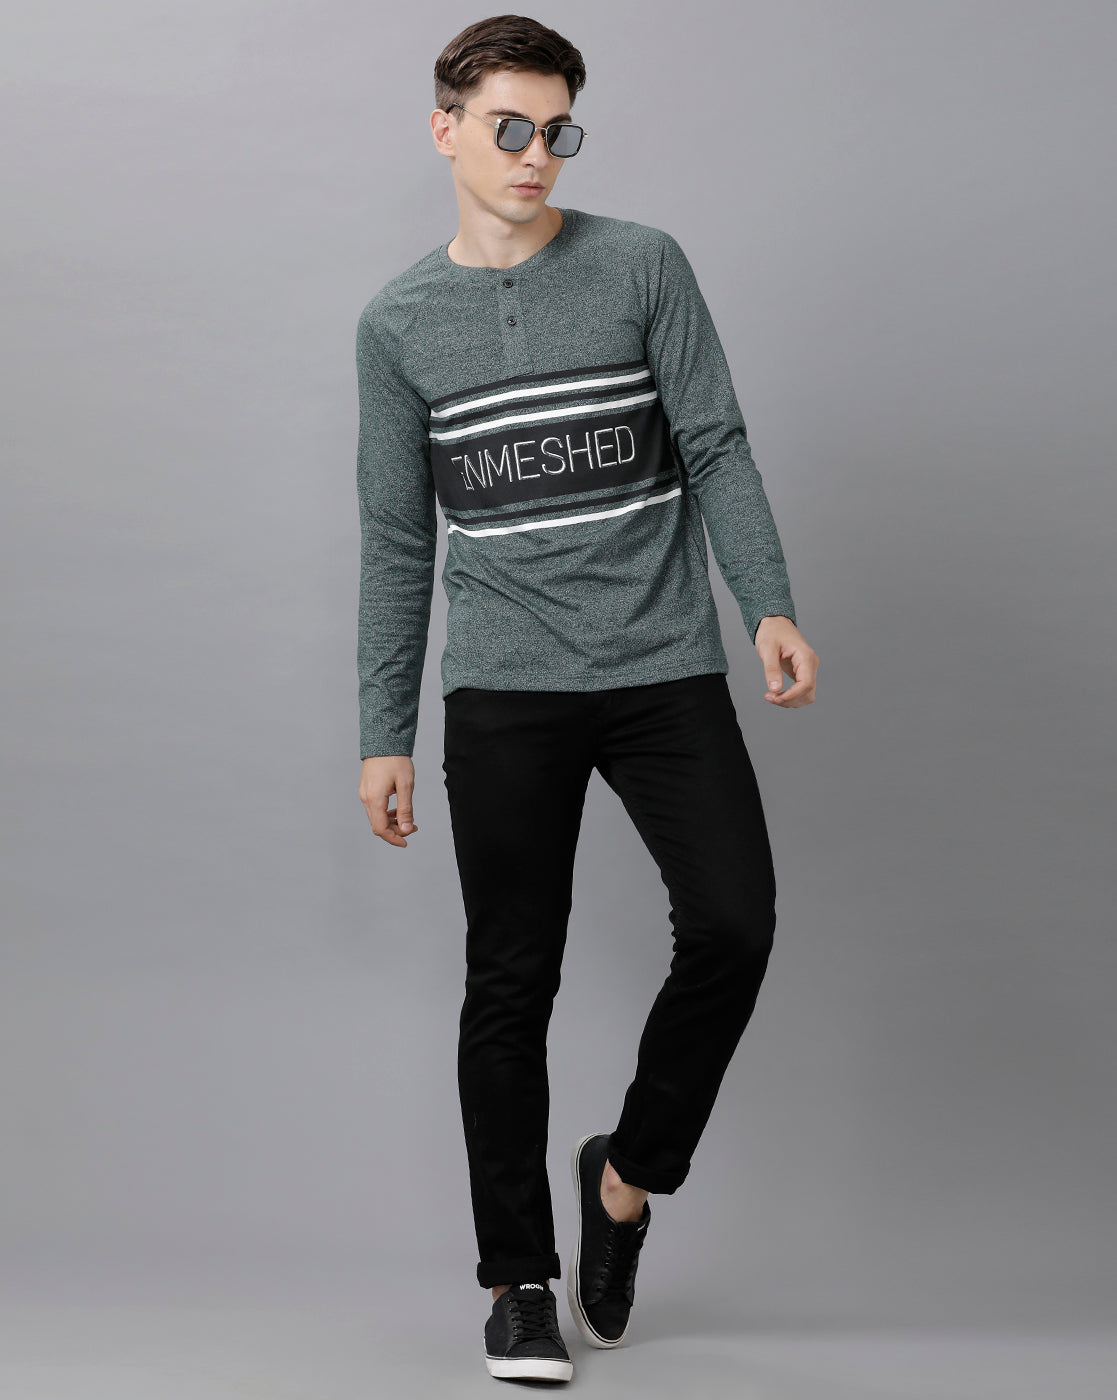 Classic Polo Mens Cotton Color Block Full Sleeve Slim Fit Round Neck Green Color T-Shirt | Baleno Fs 483 A